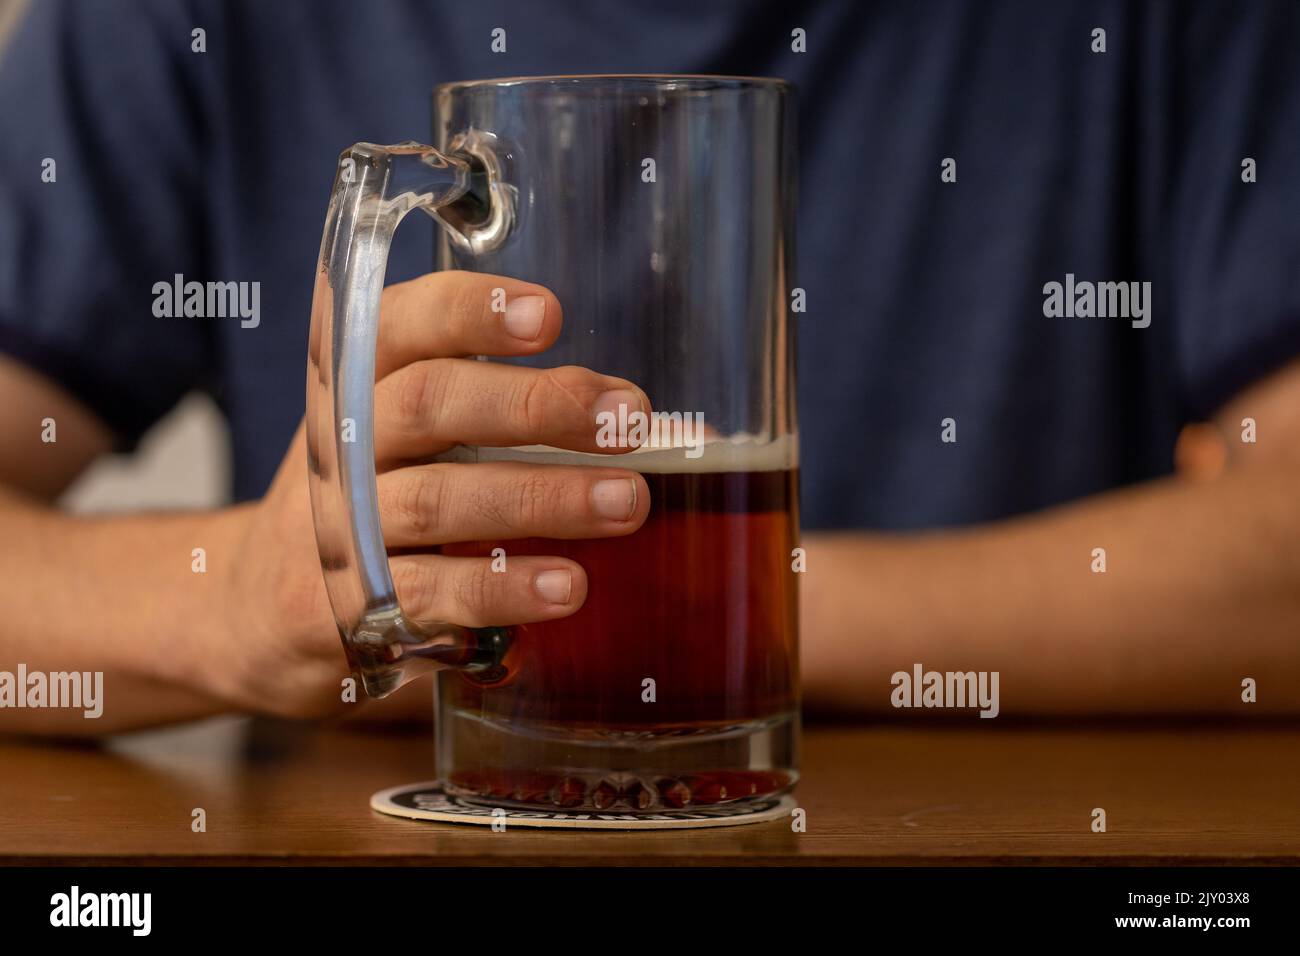 Close-up of Man's Hand Holding a Stein of Beer Stock Photo